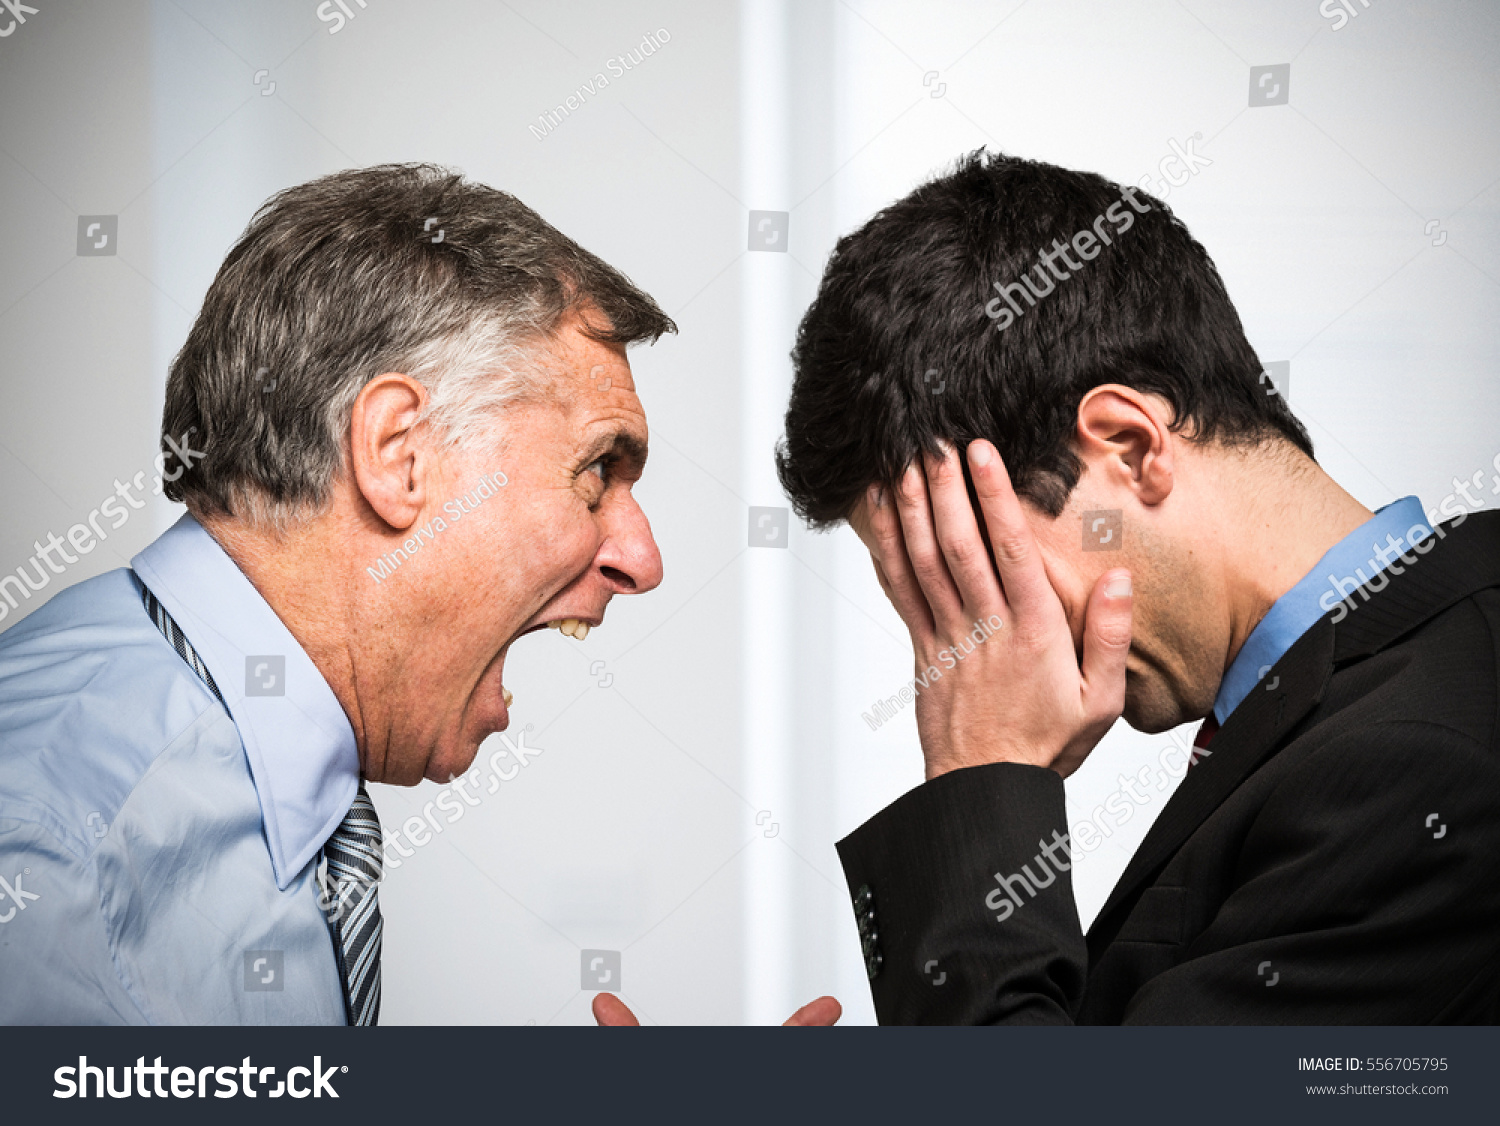 Angry boss shouting to an employee #556705795